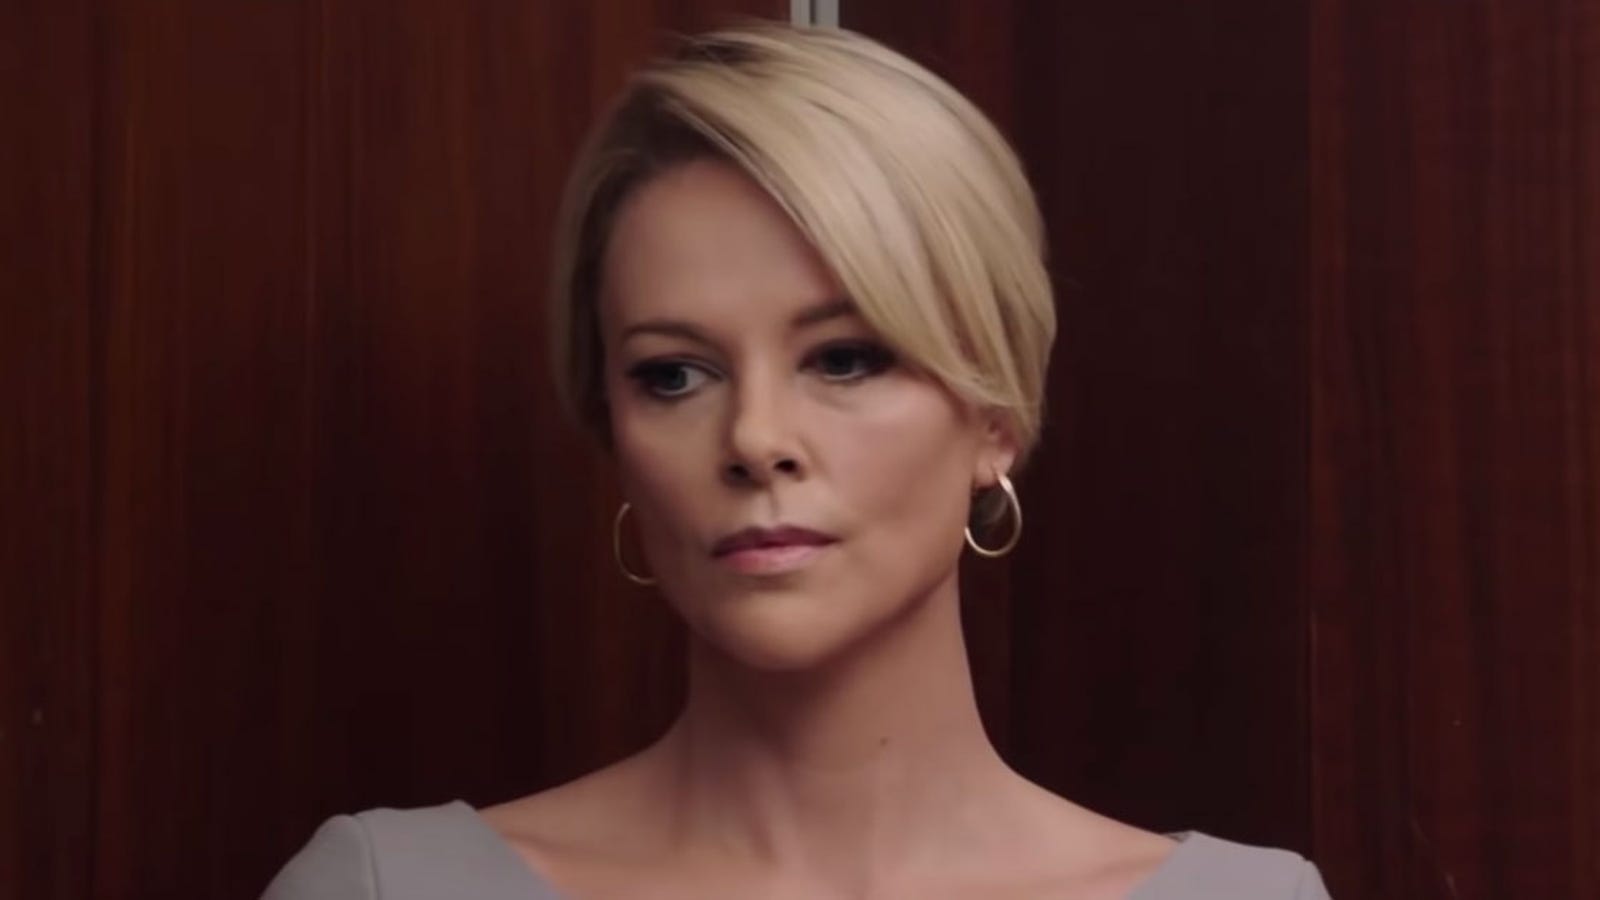 Charlize Theron Spot On As Megyn Kelly in Bombshell Trailer1600 x 900